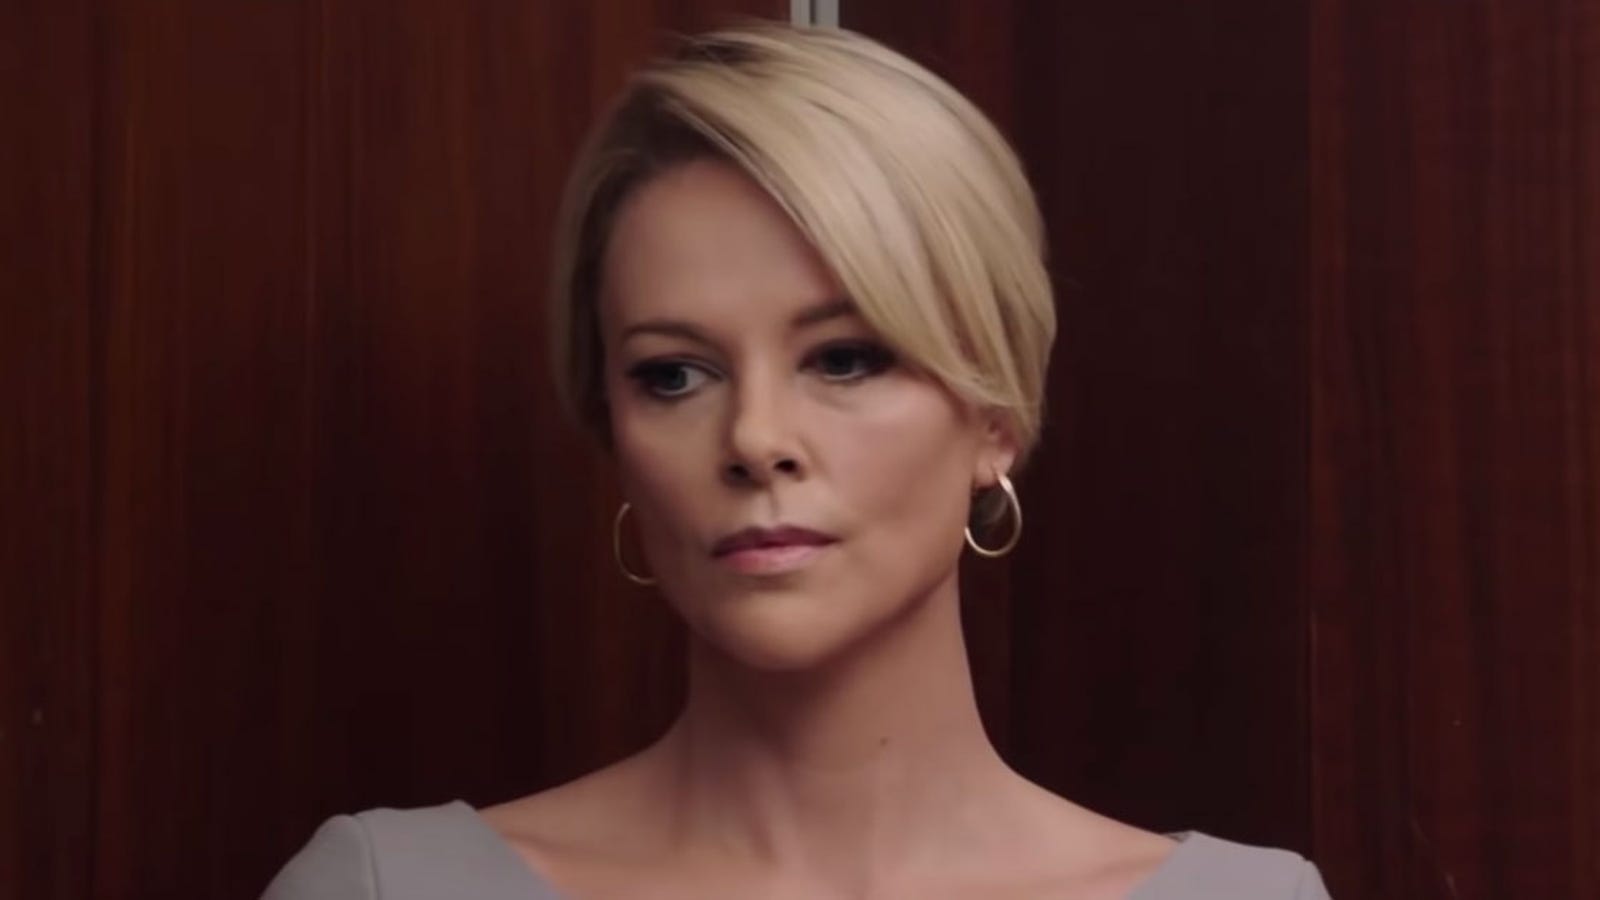 Charlize Theron Spot On As Megyn Kelly in Bombshell Trailer1600 x 900